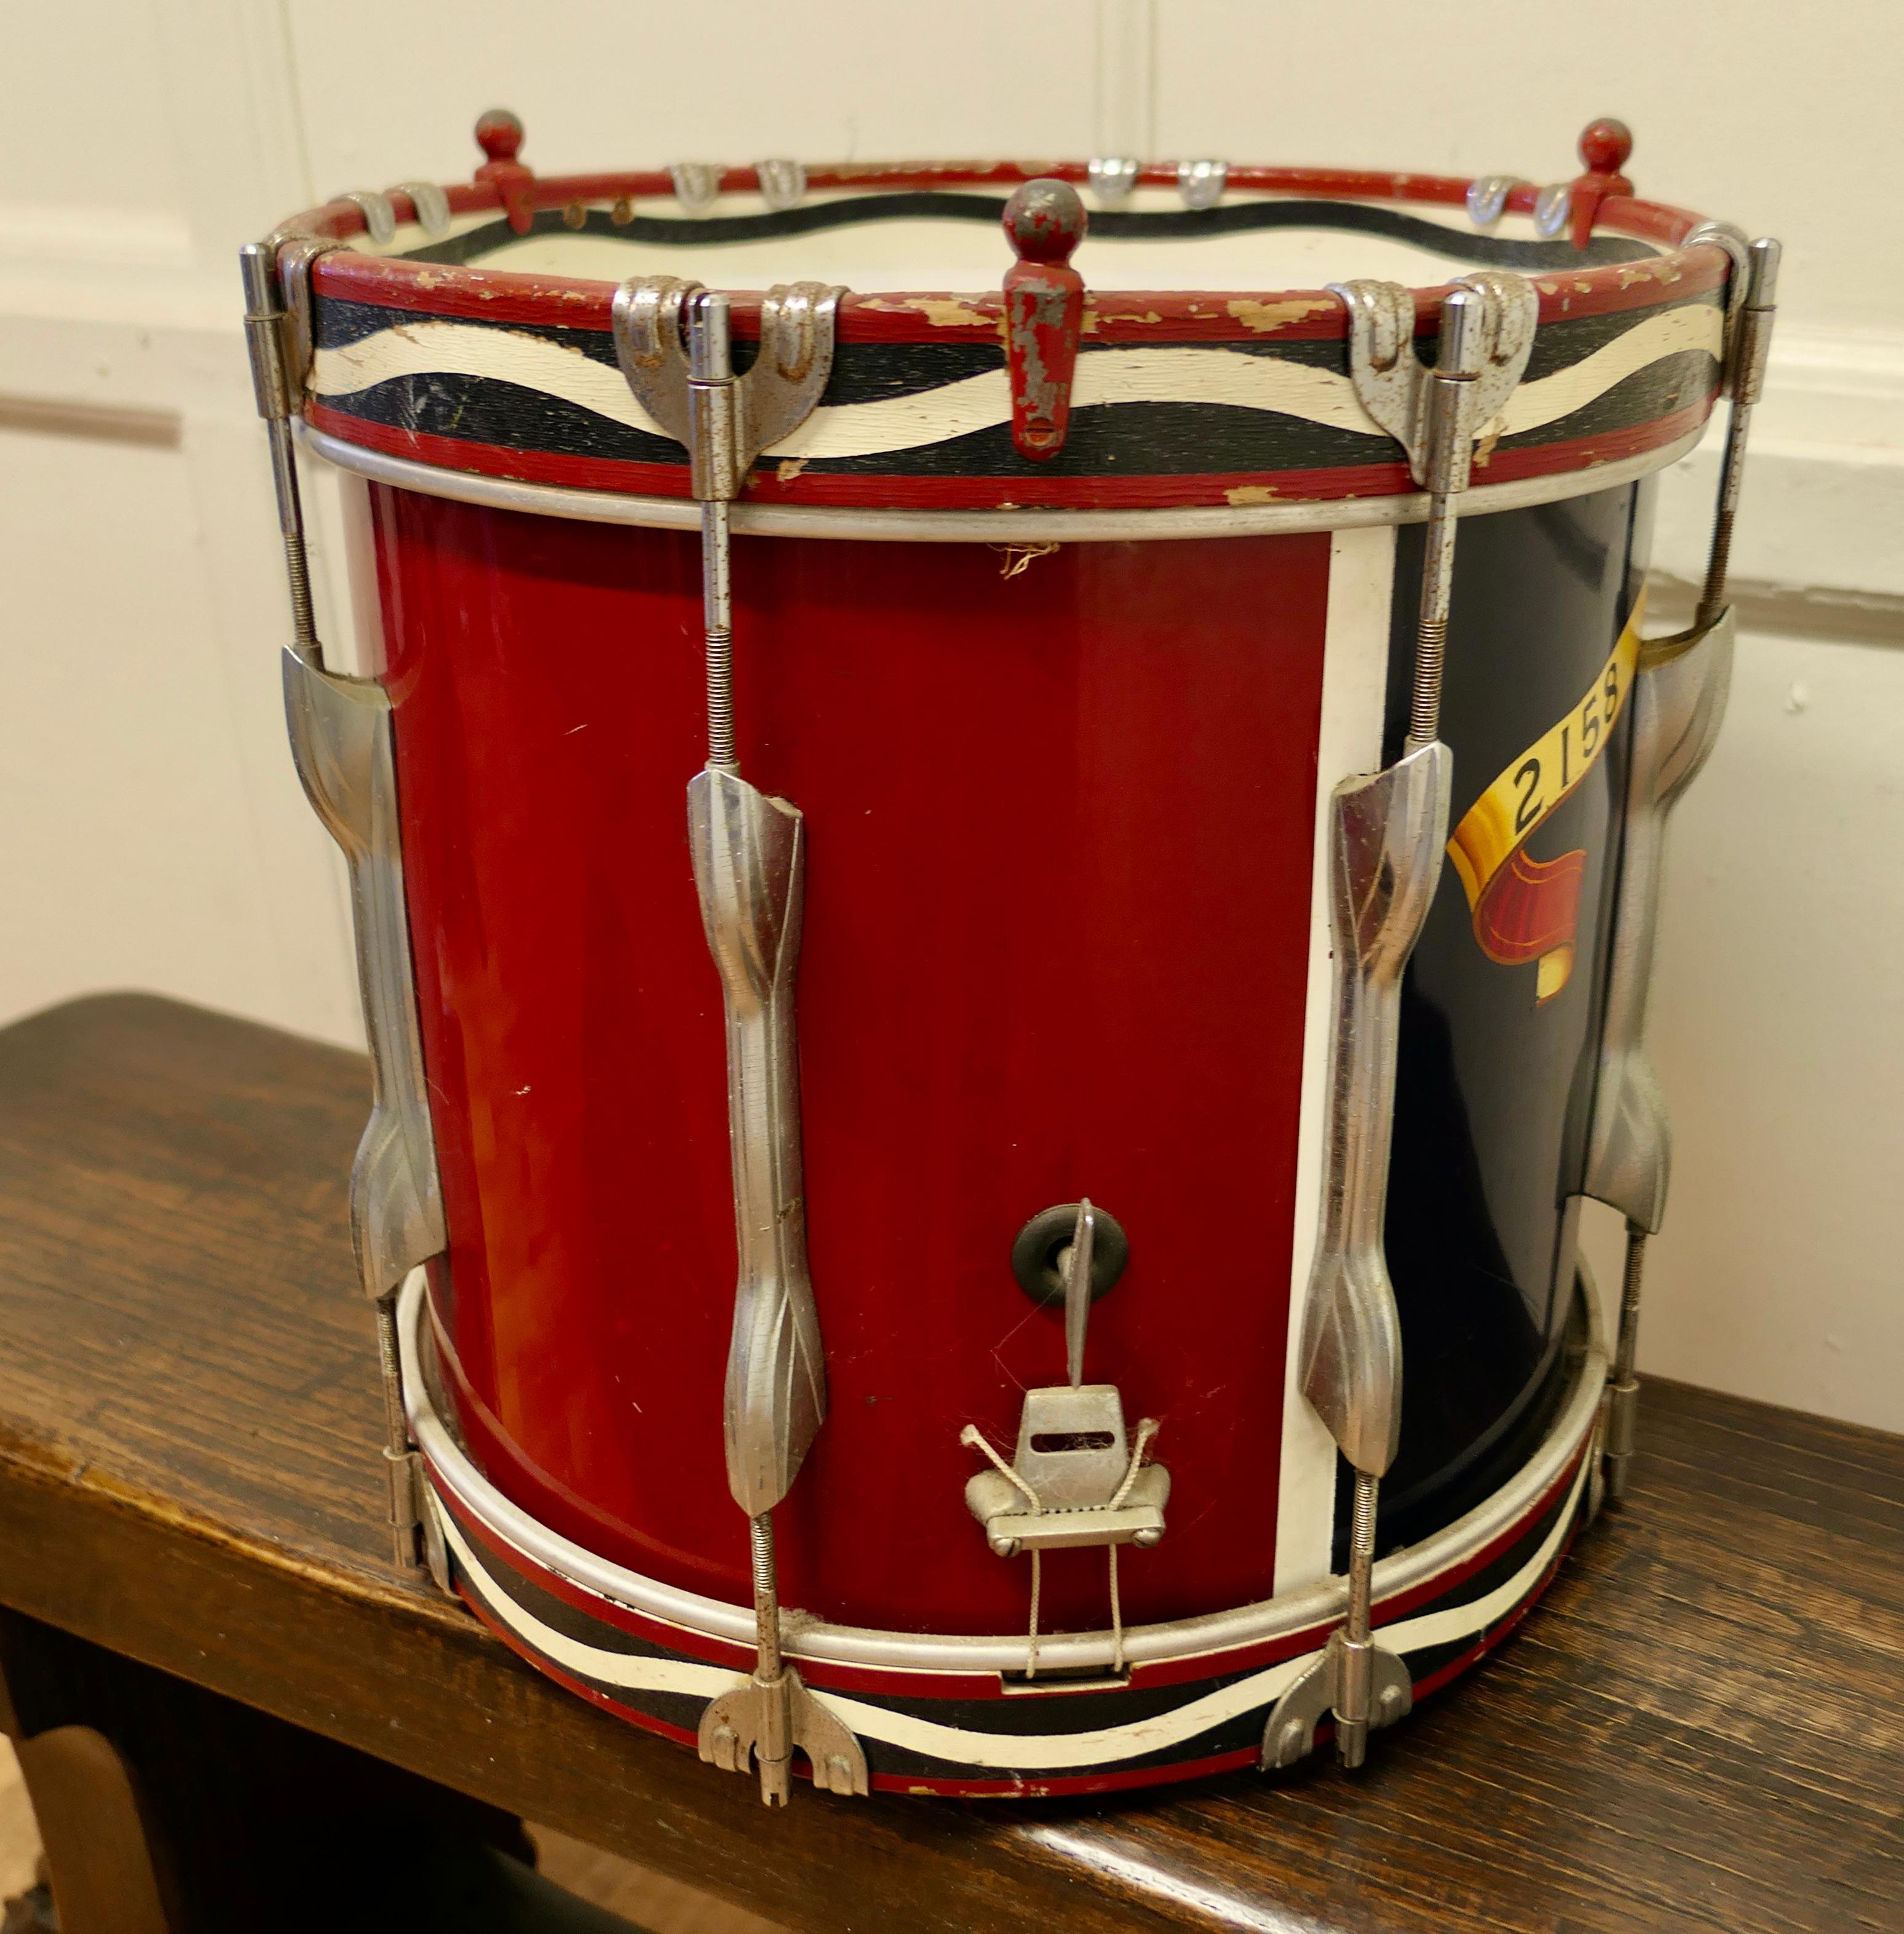 British Colonial Handsome Military Snare Drum from Sevenoaks Air Training Corps For Sale